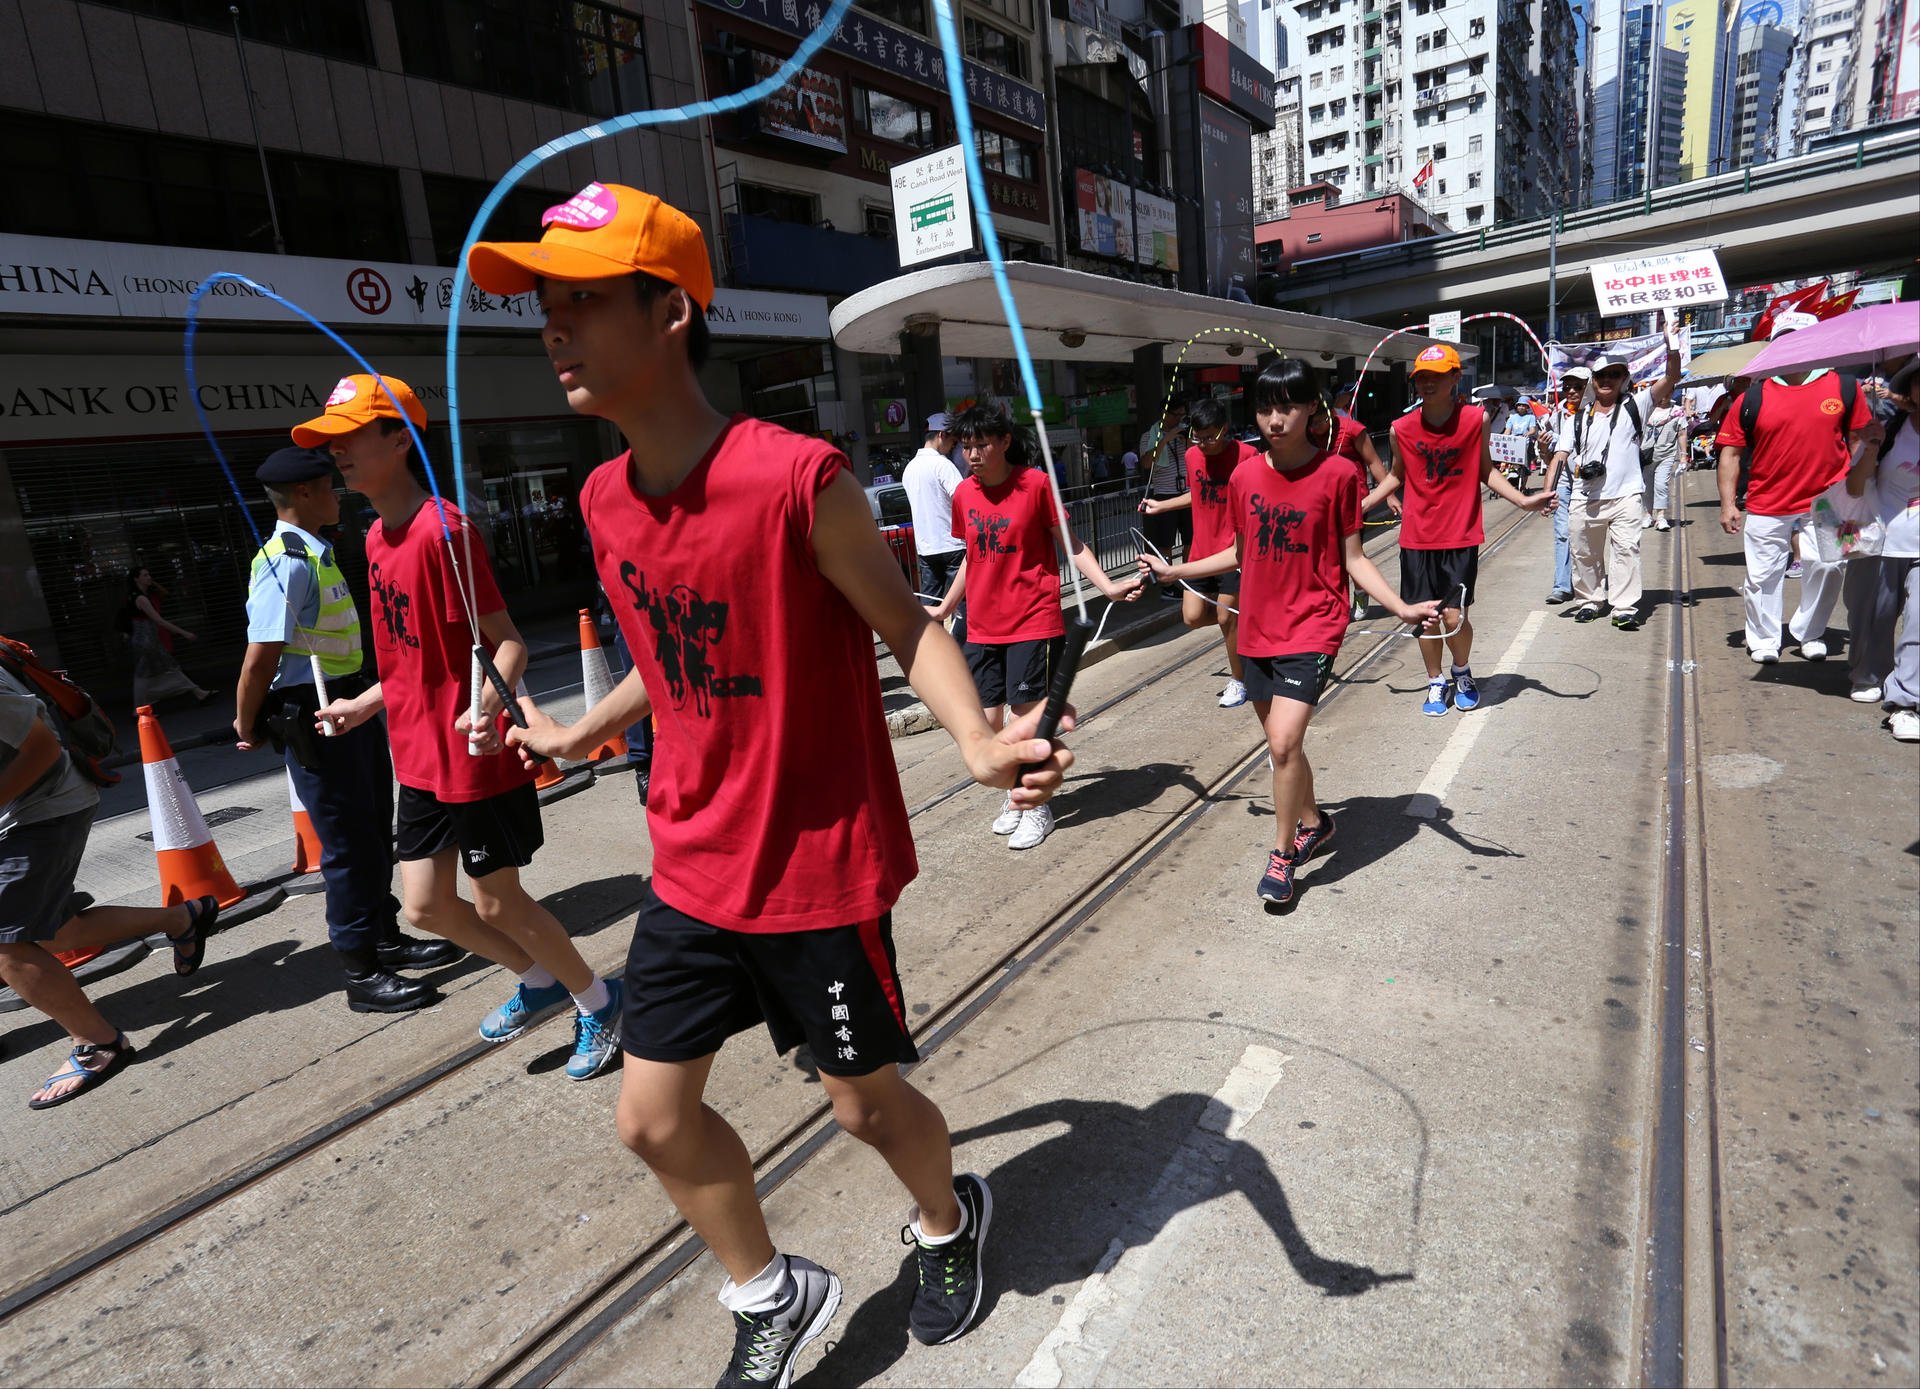 Groups took part in the morning's run. Photo: SCMP